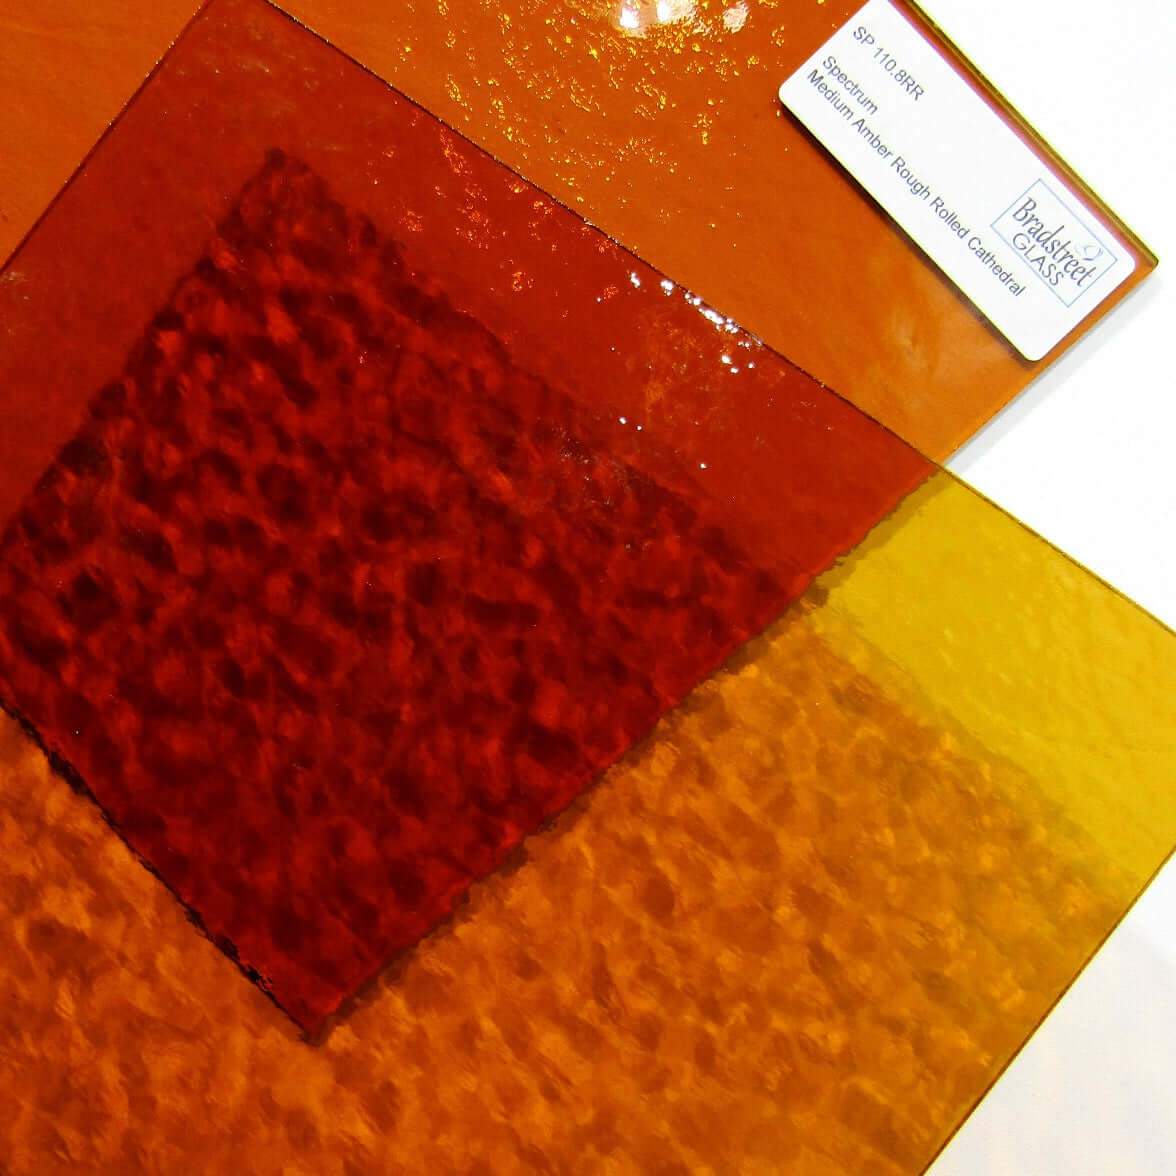 Medium Amber Rough Rolled Fusible Stained Glass Sheet 96 COE Oceanside SF110.8RR